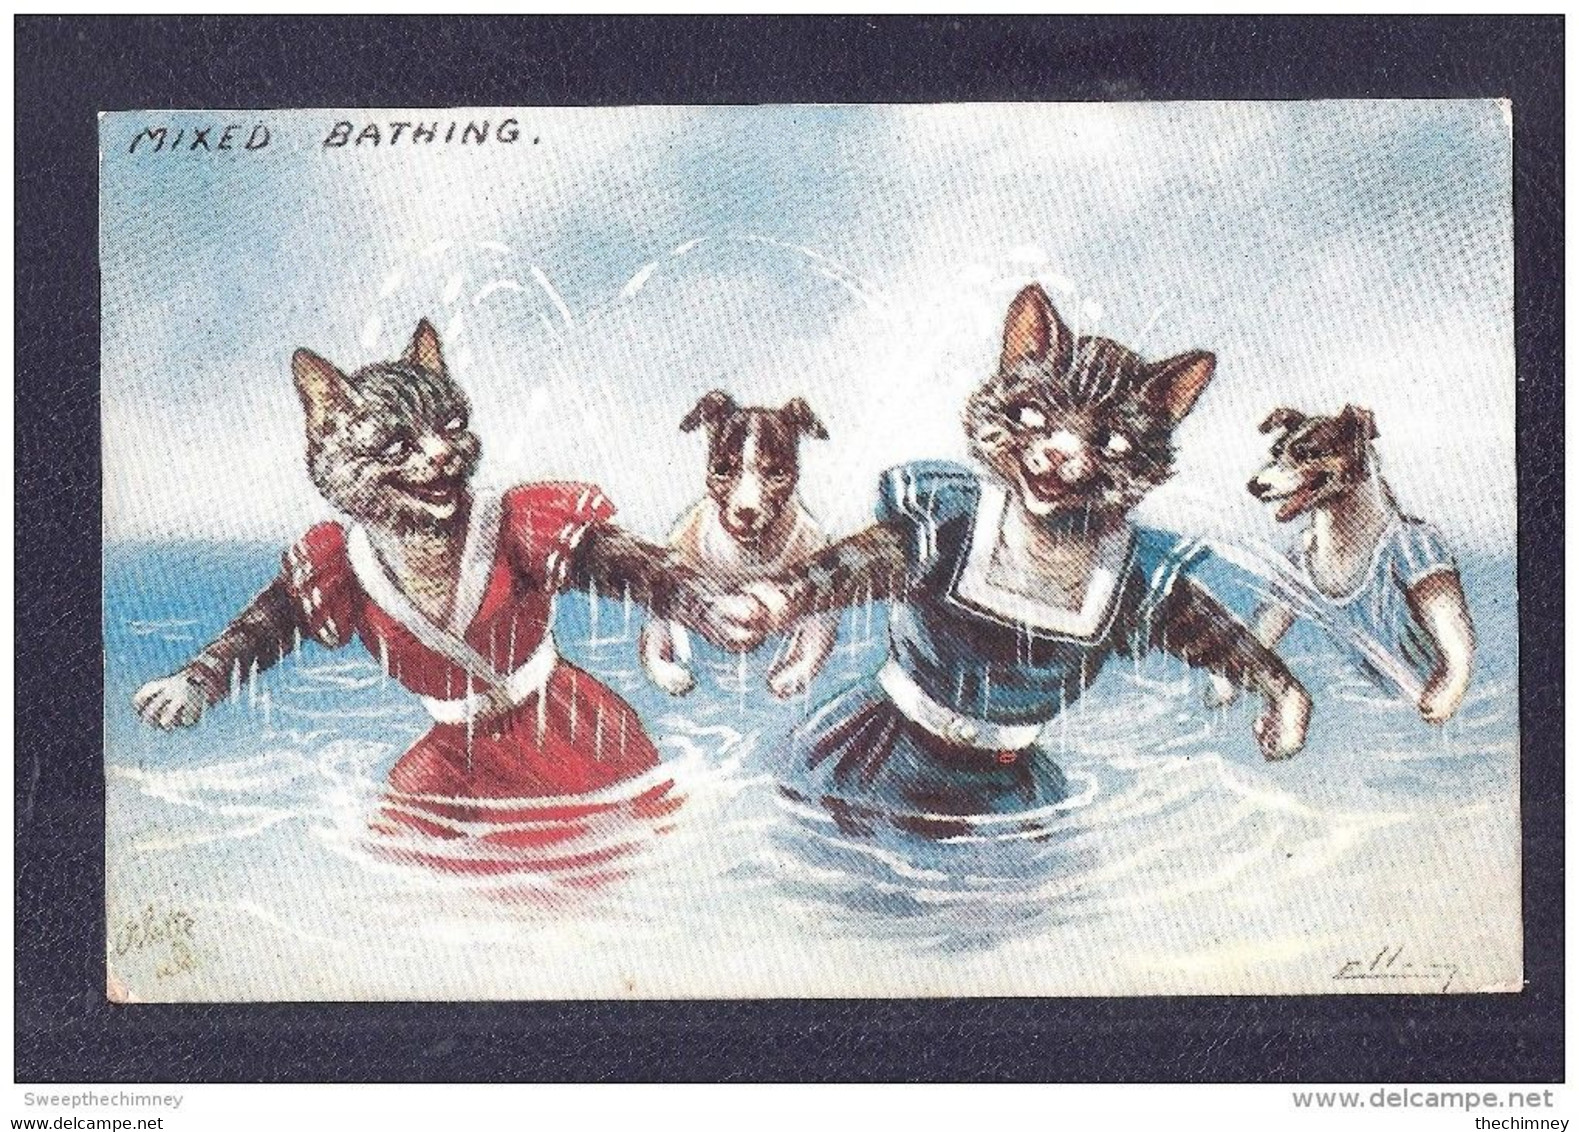 Chat CAT CATS  A La Mer, Mixed Bathing, Illustrateur Ellam, Raphael Tuck, Oilette USED 1909 + STAMP TIMBRE - Gatti